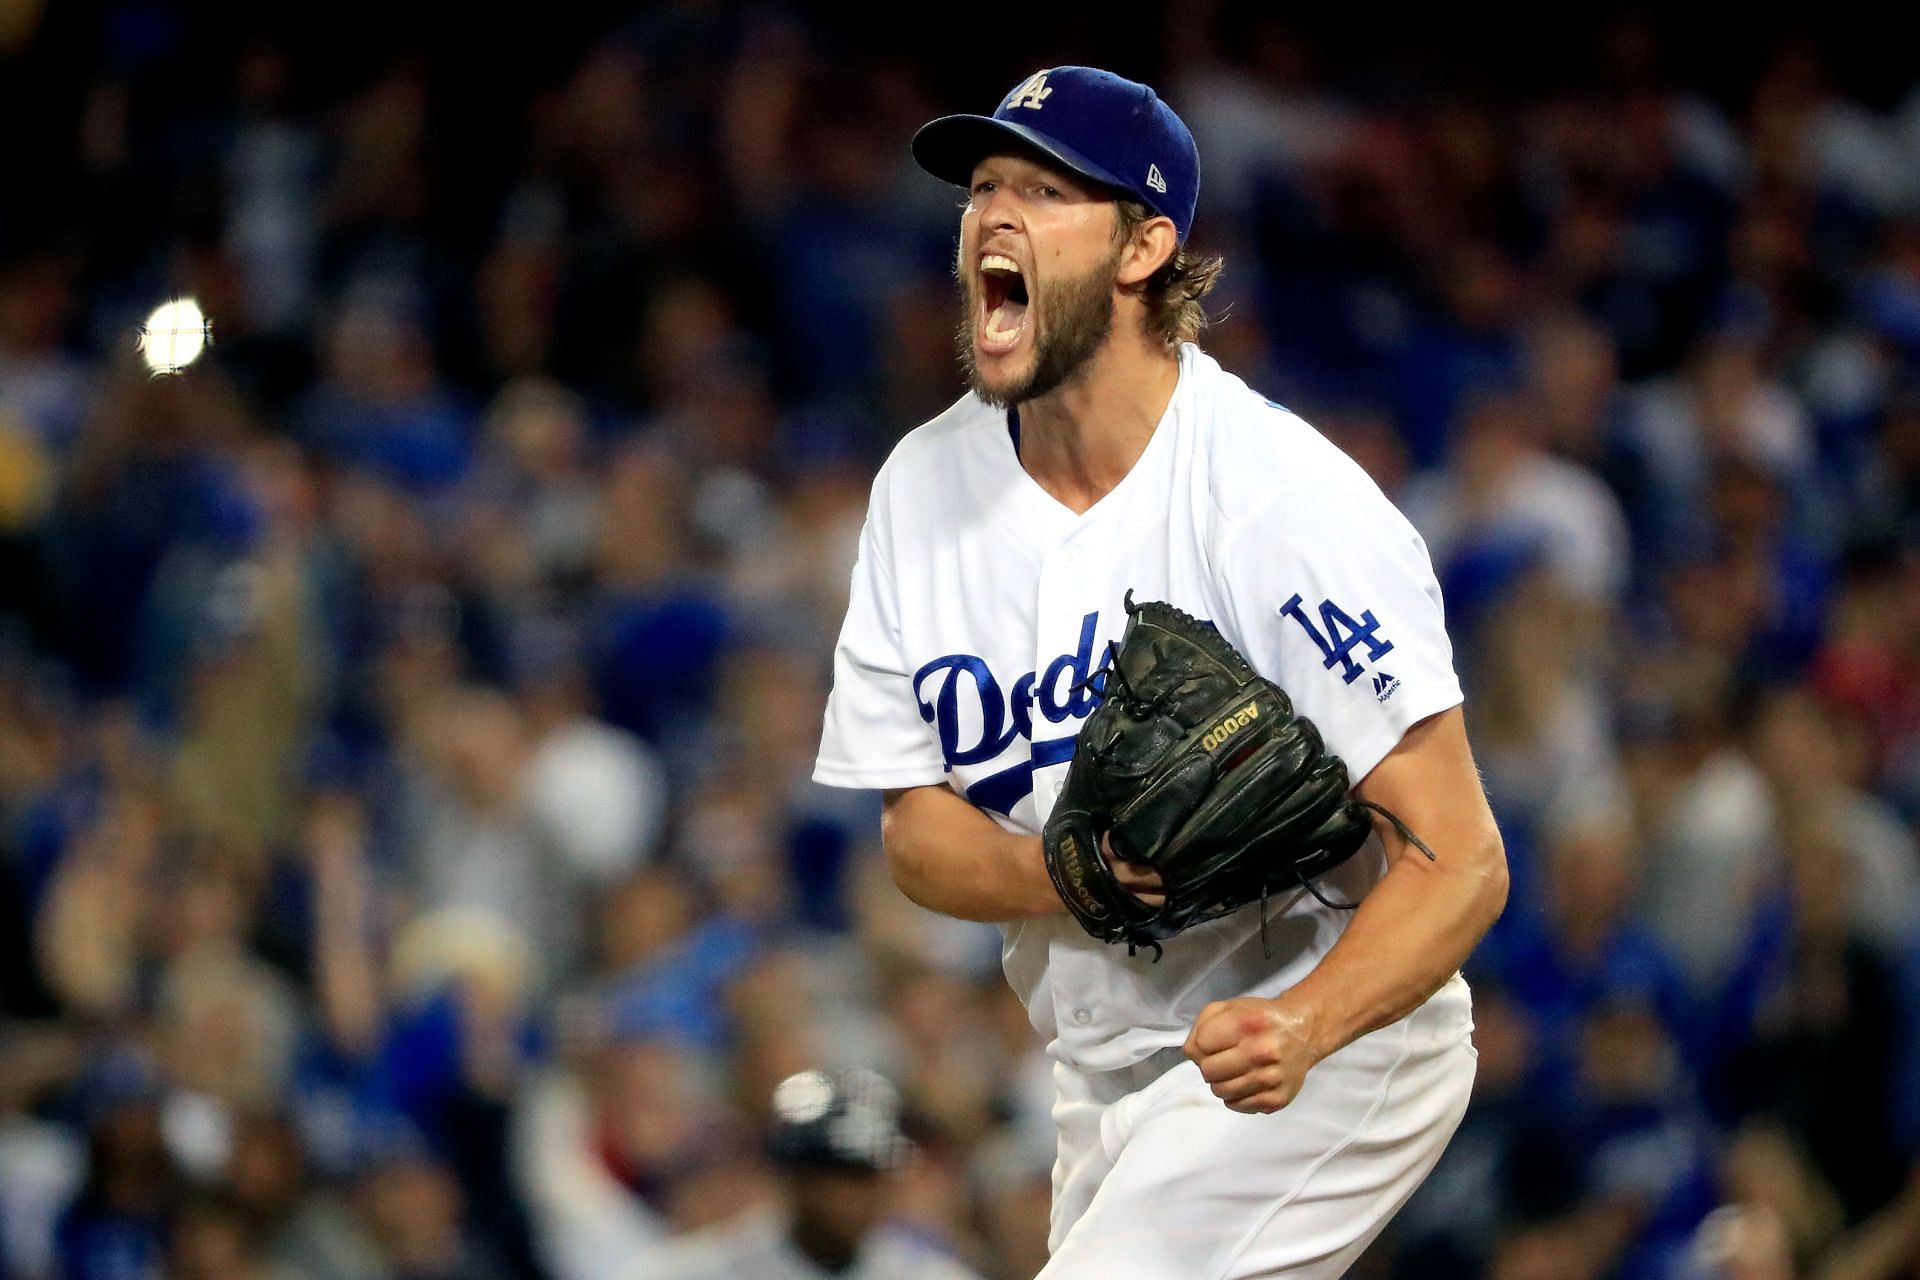 Clayton Kershaw, the top MLB pitcher of the last decade